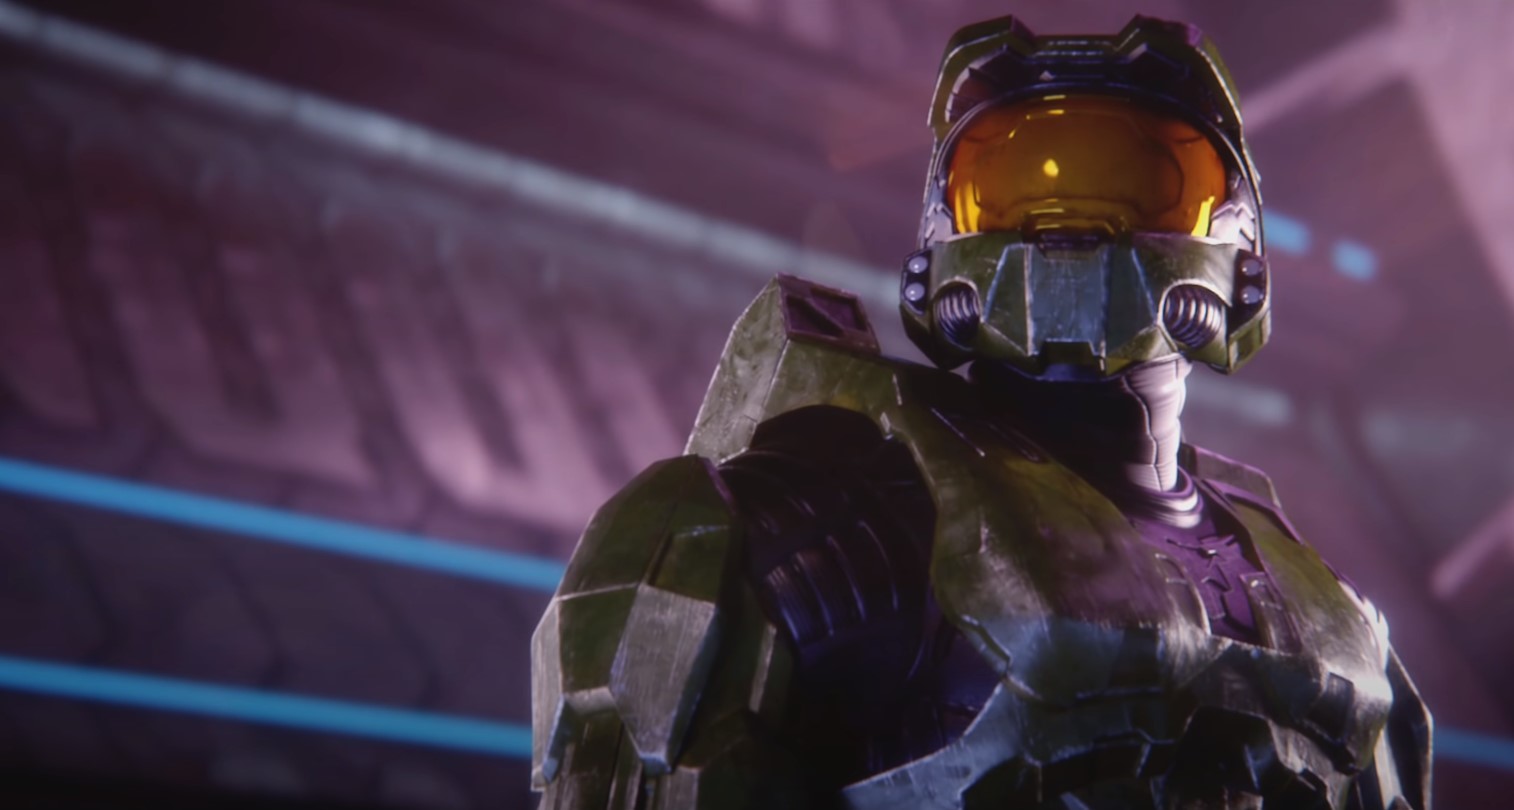 Inside the journey to bring Halo back to PC